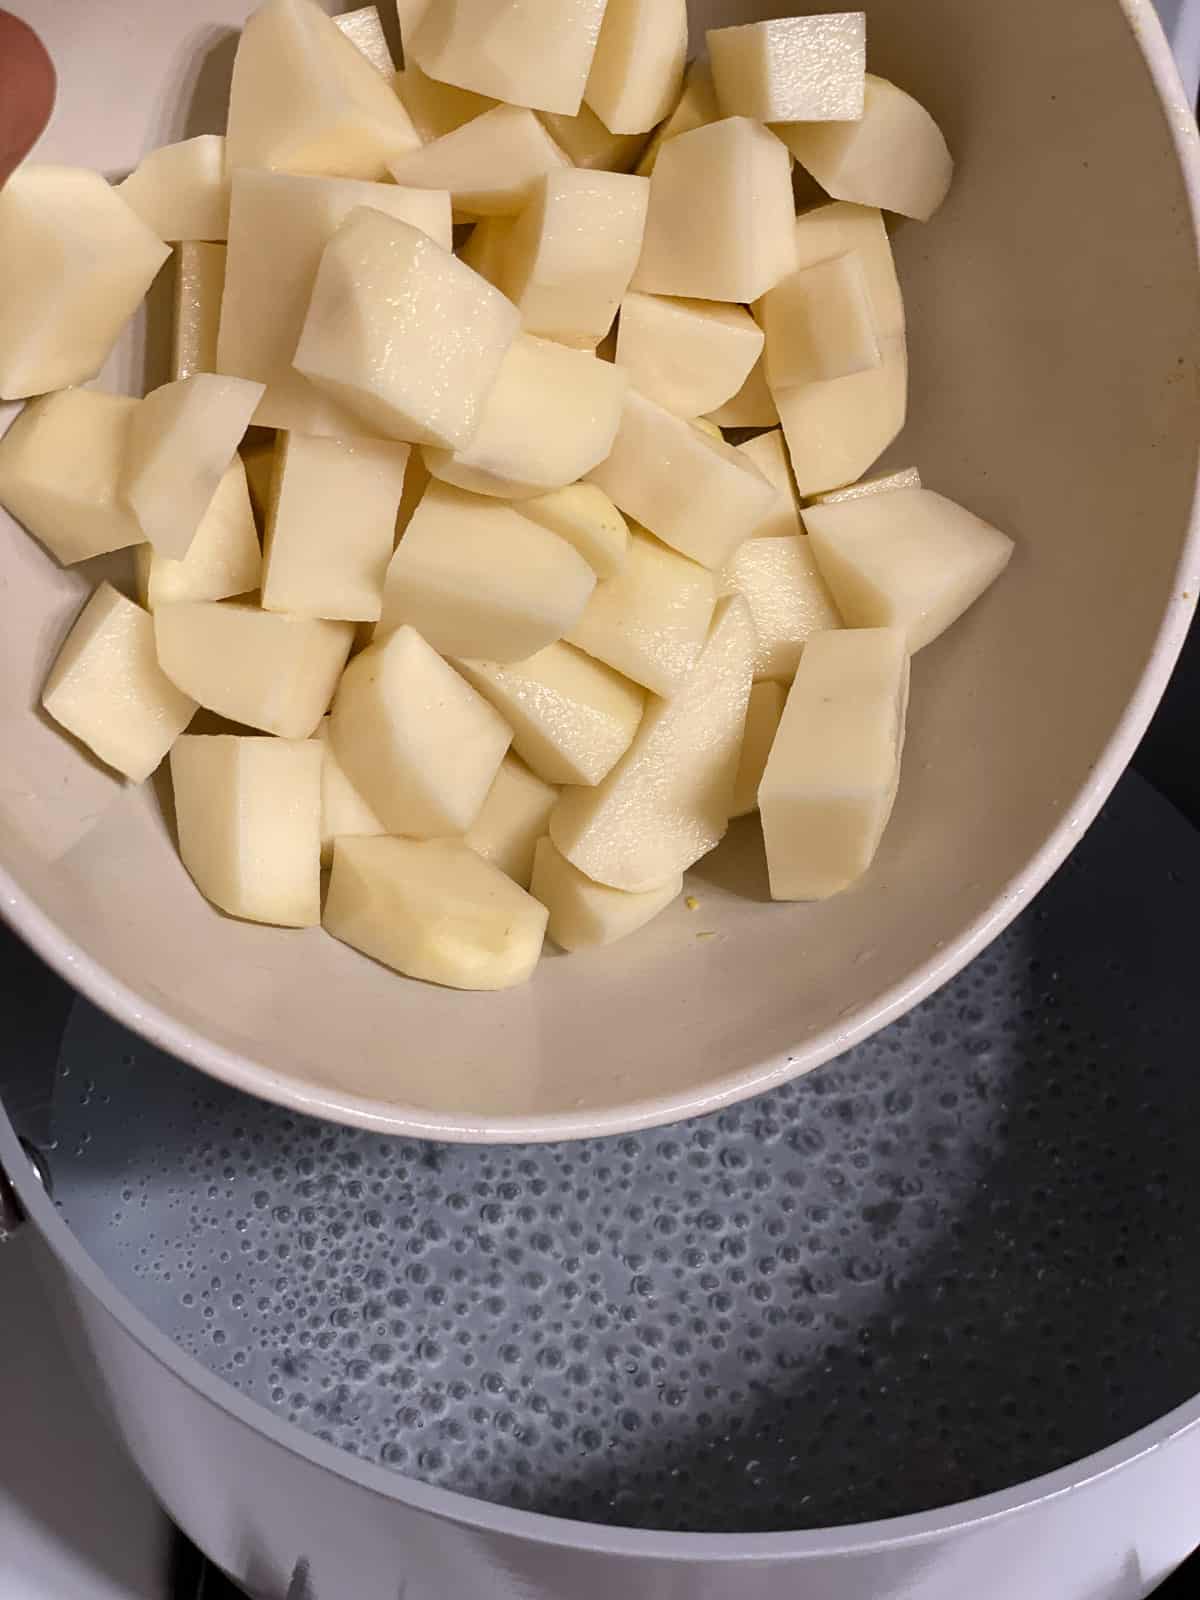 cubed potatoes in a bowl above a pan